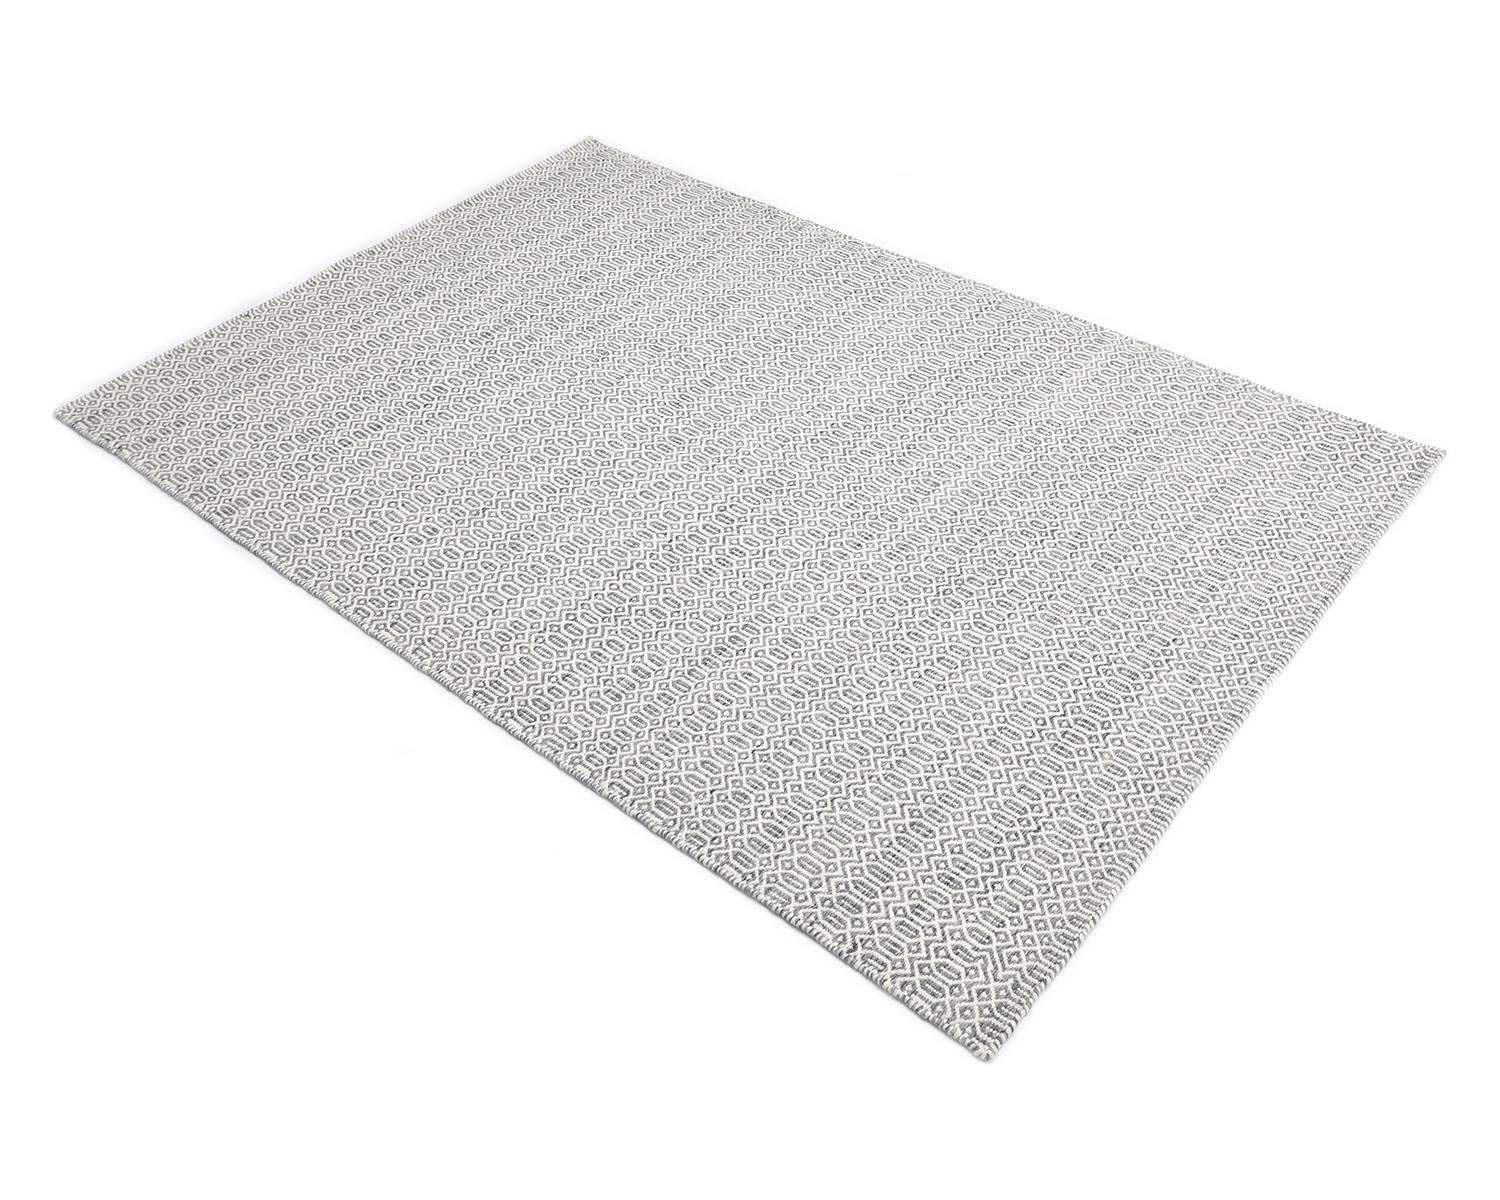 Solo Rugs Flatweave Geometric Hand Woven Gray Area Rug For Sale 1